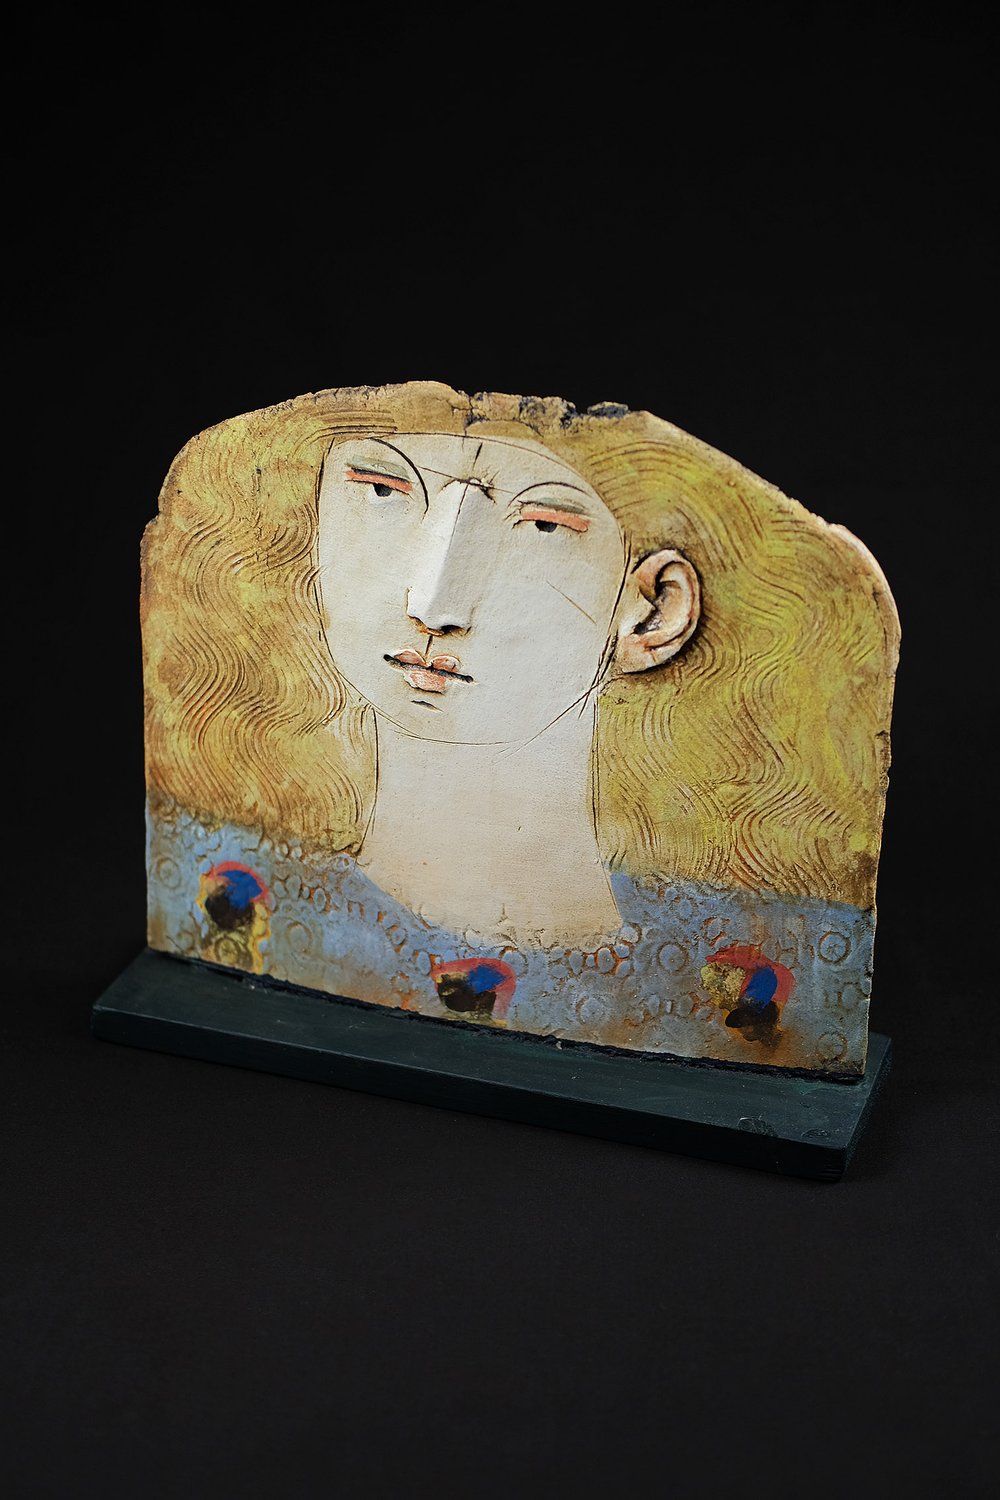 Image of CHRISTY KEENEY - 'WOMAN OF GALWAY' SCULPTURE